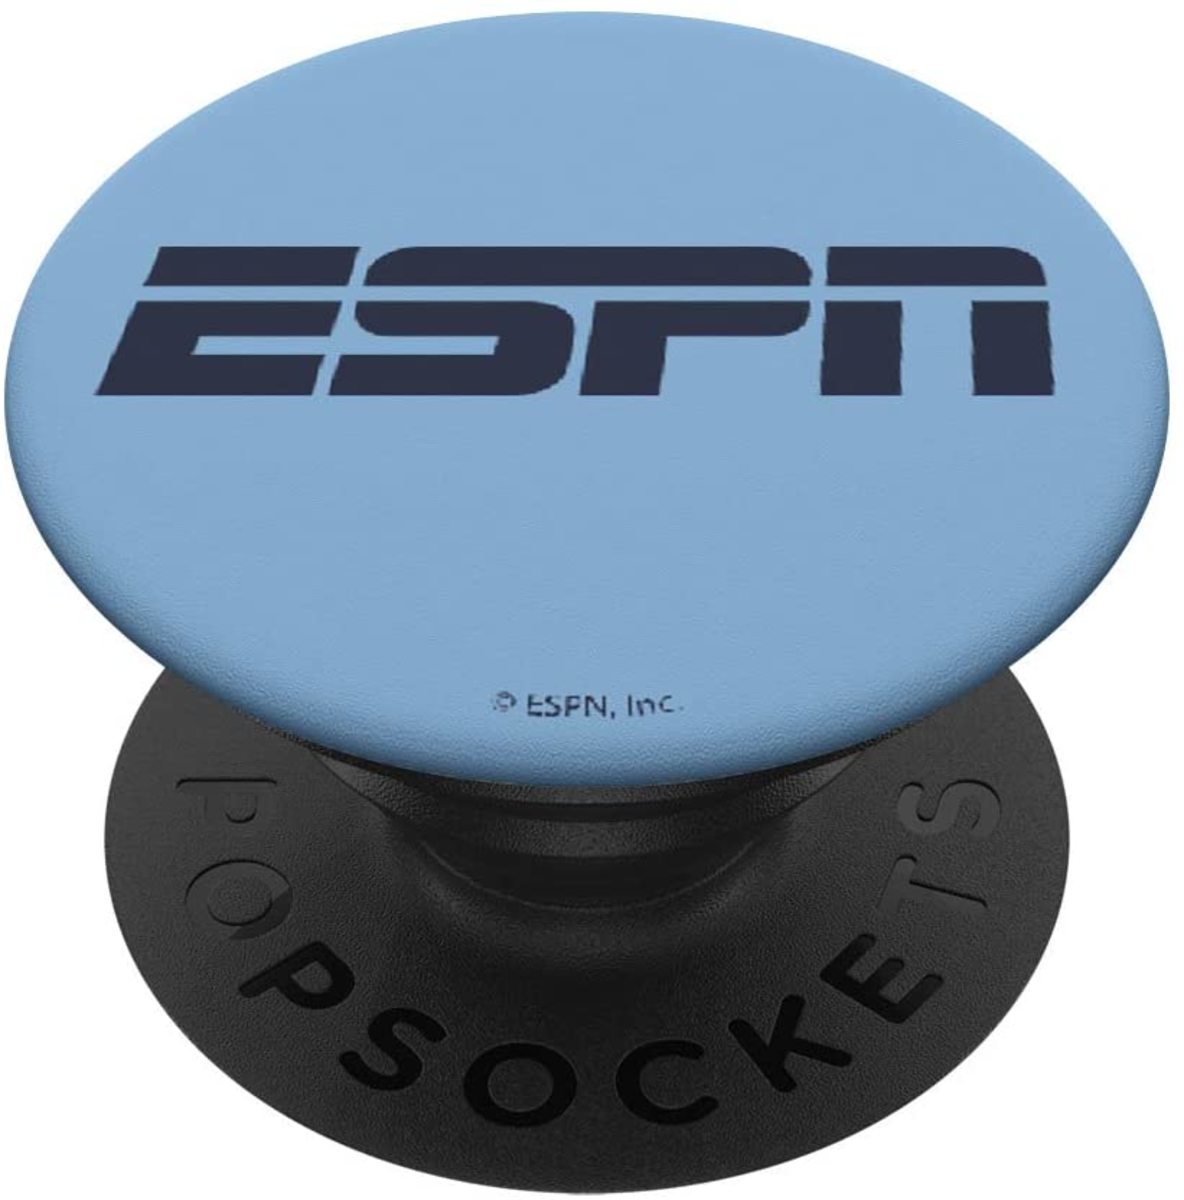 In 1979, ESPN—the Entertainment and Sports Programming Network—began broadcasting.